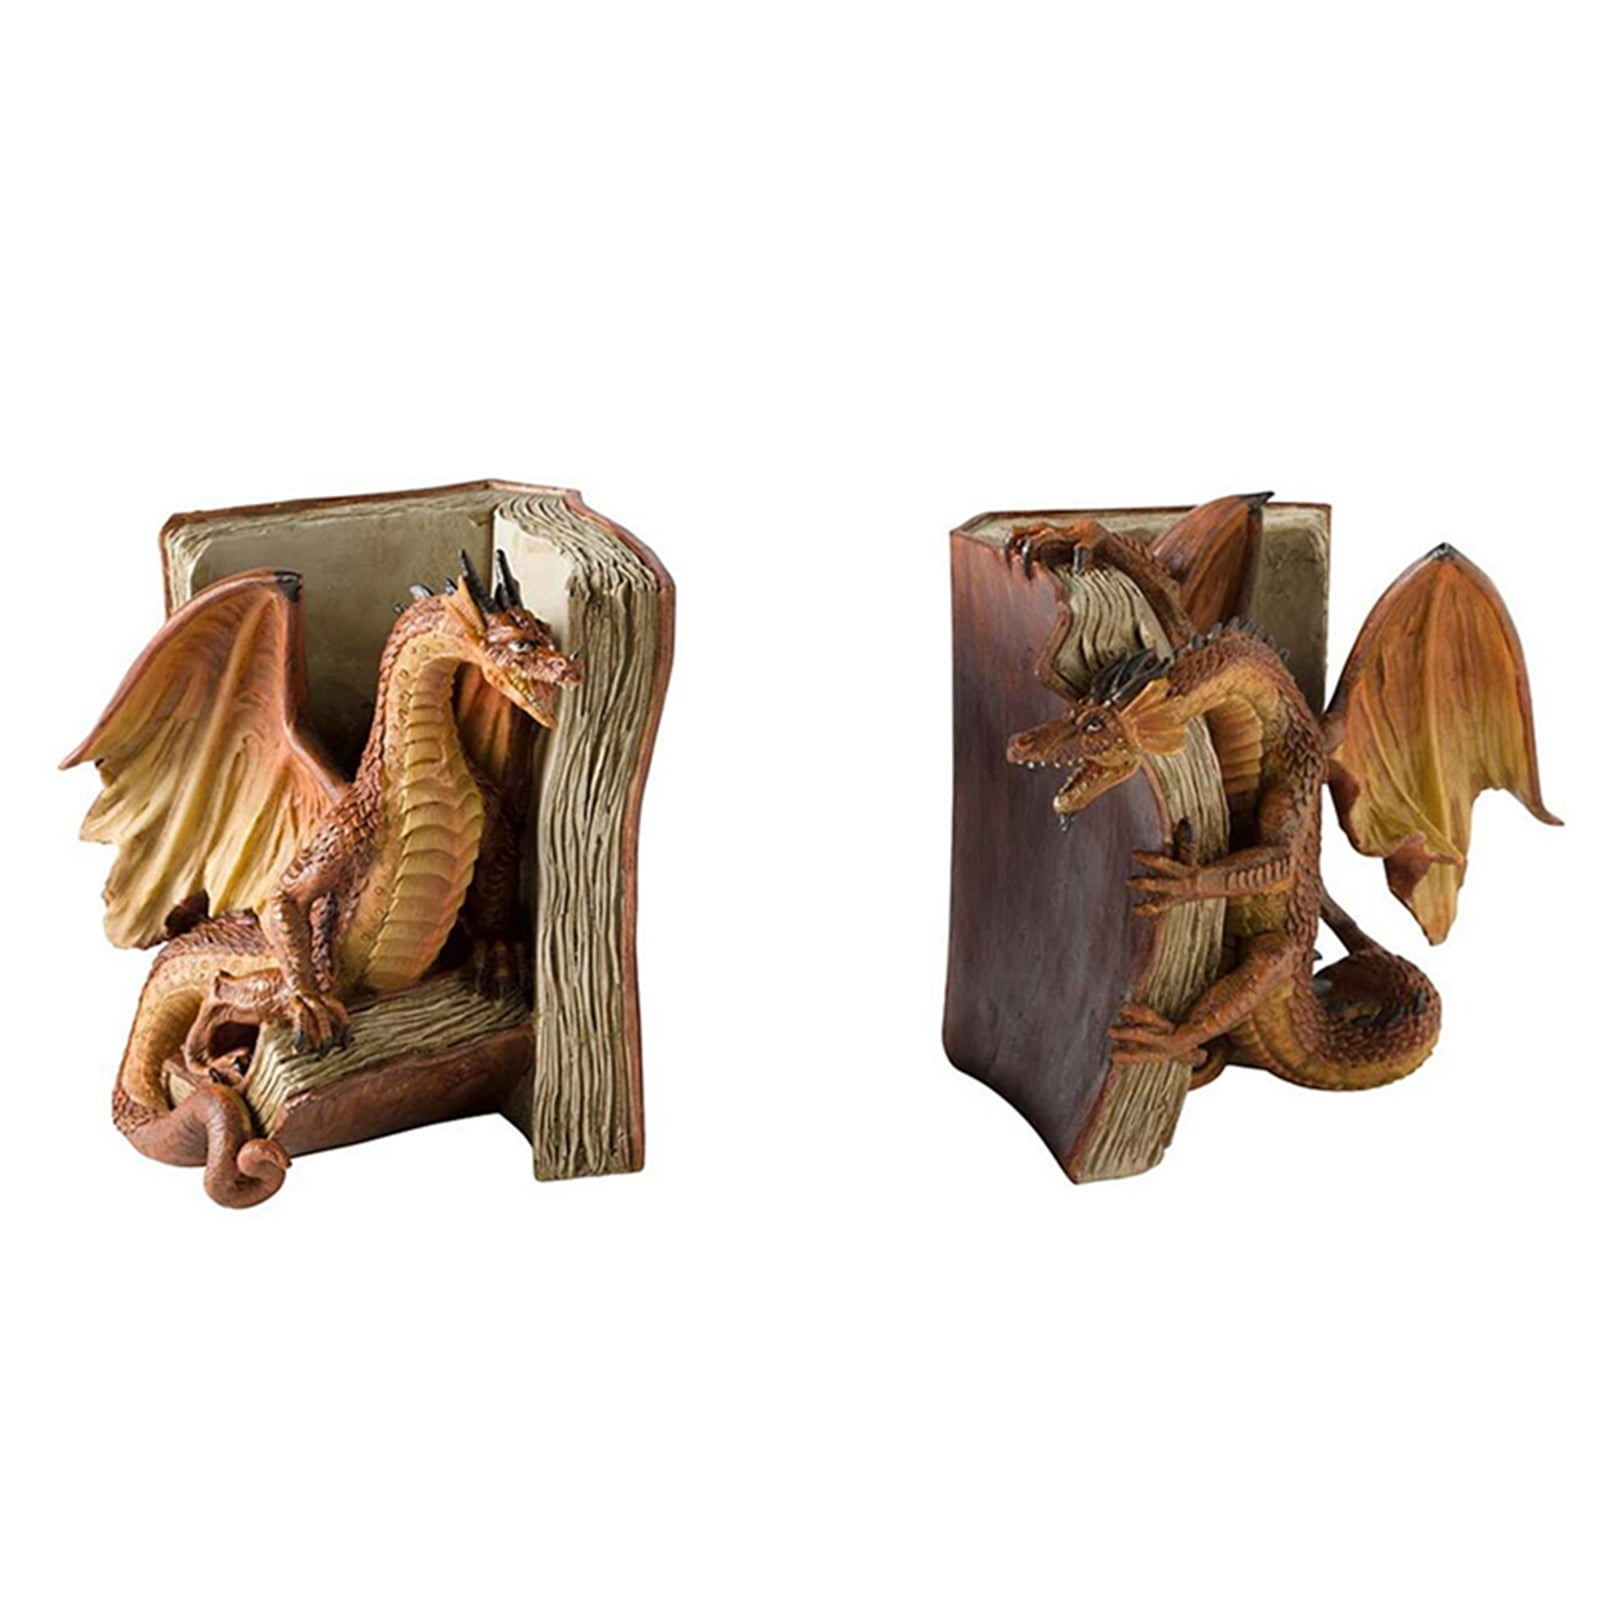 Dreafly Fighting Dragon Bookends Resin Decorative Bookend Statues Desktop Ornament 